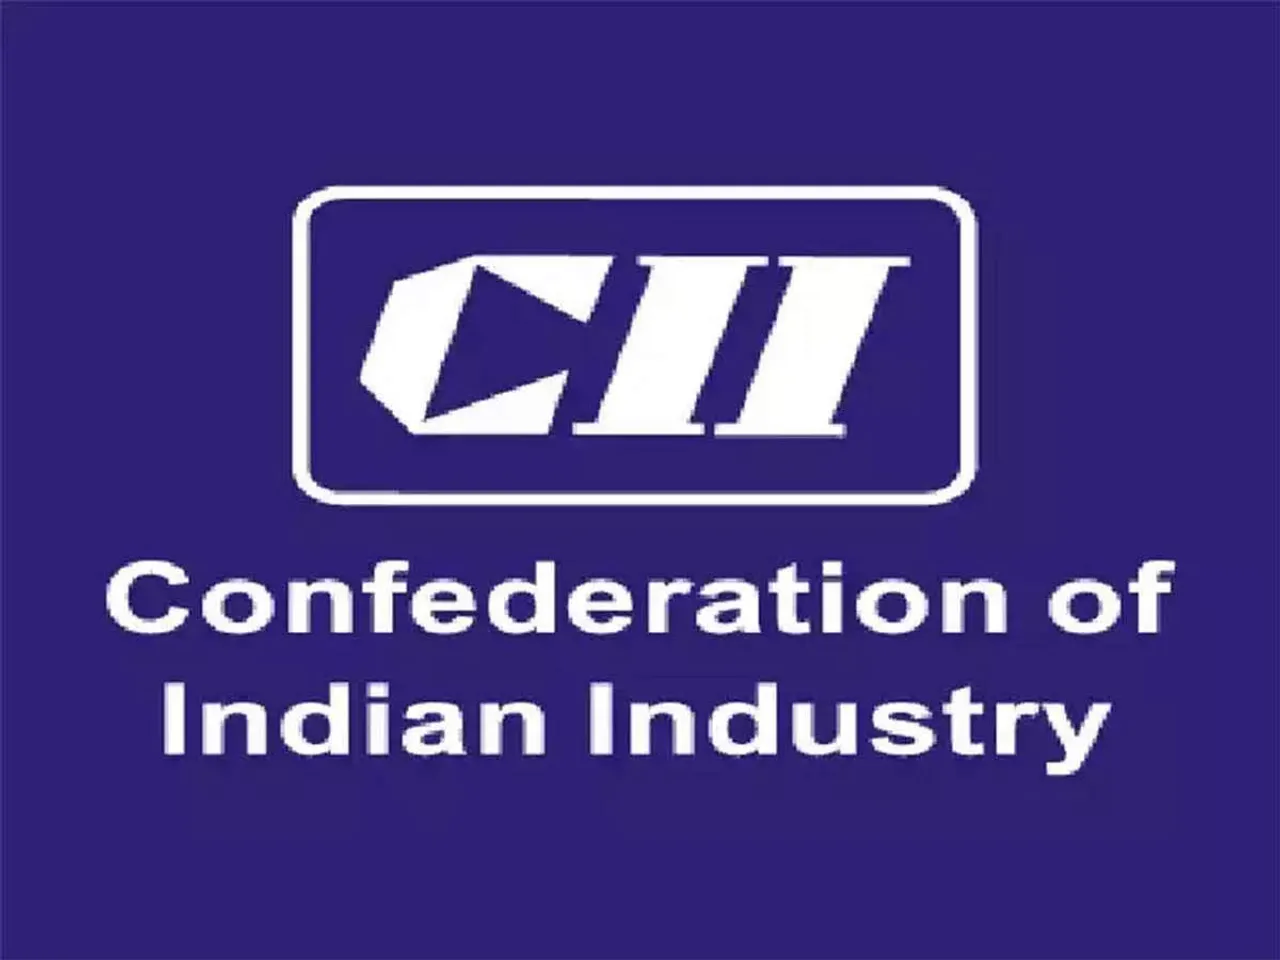 Confederation of Indian Industry.jpg